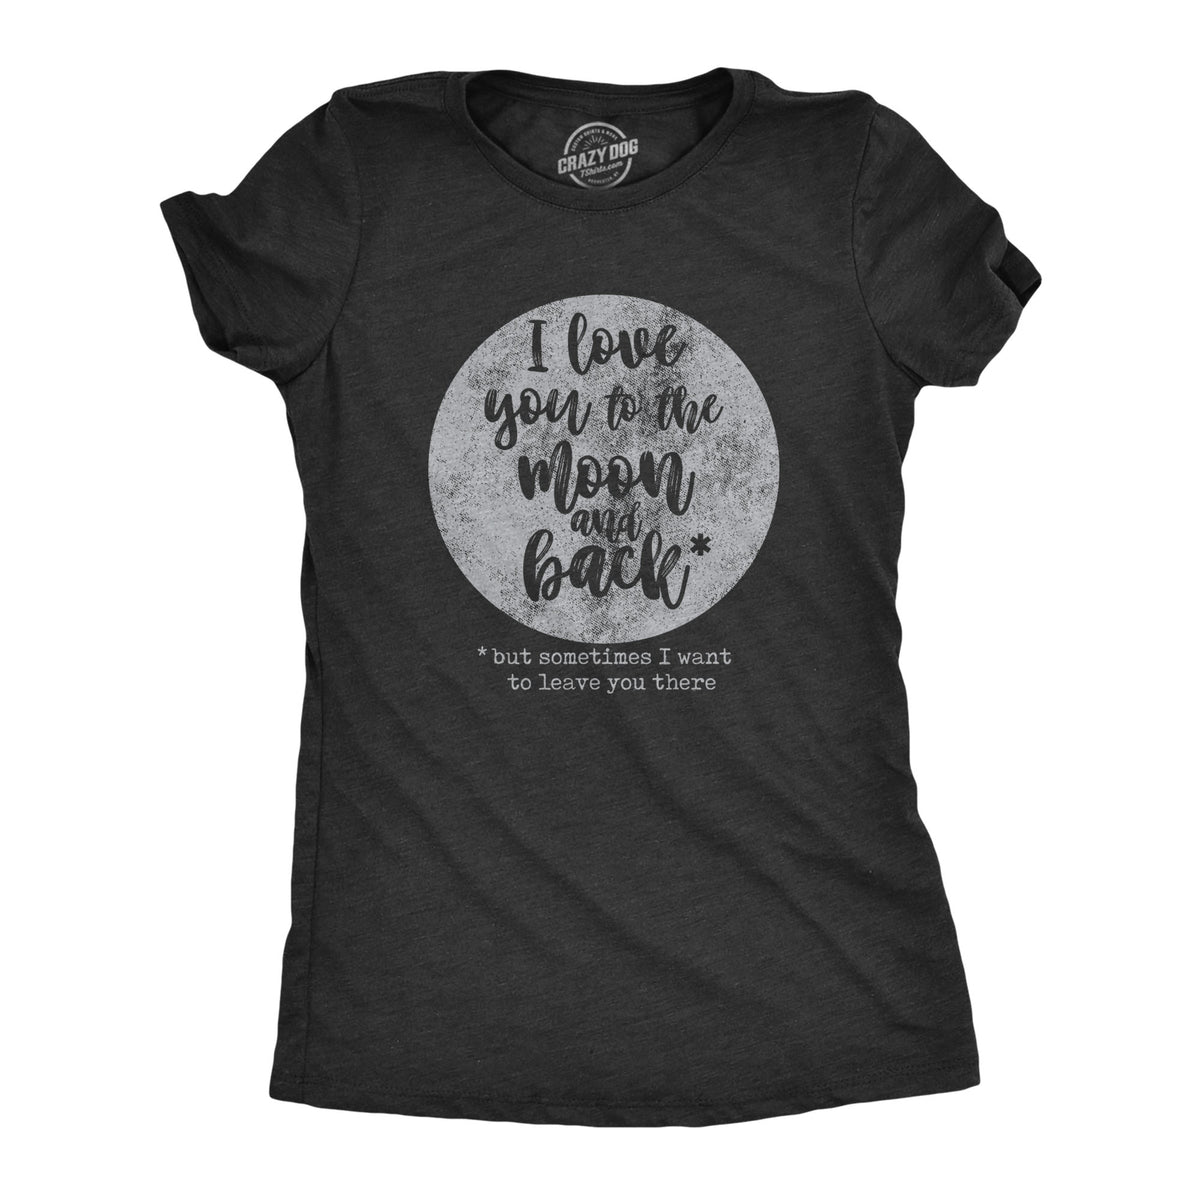 Funny Heather Black - HAUNT I Love You To The Moon And Back Womens T Shirt Nerdy Halloween Sarcastic Tee